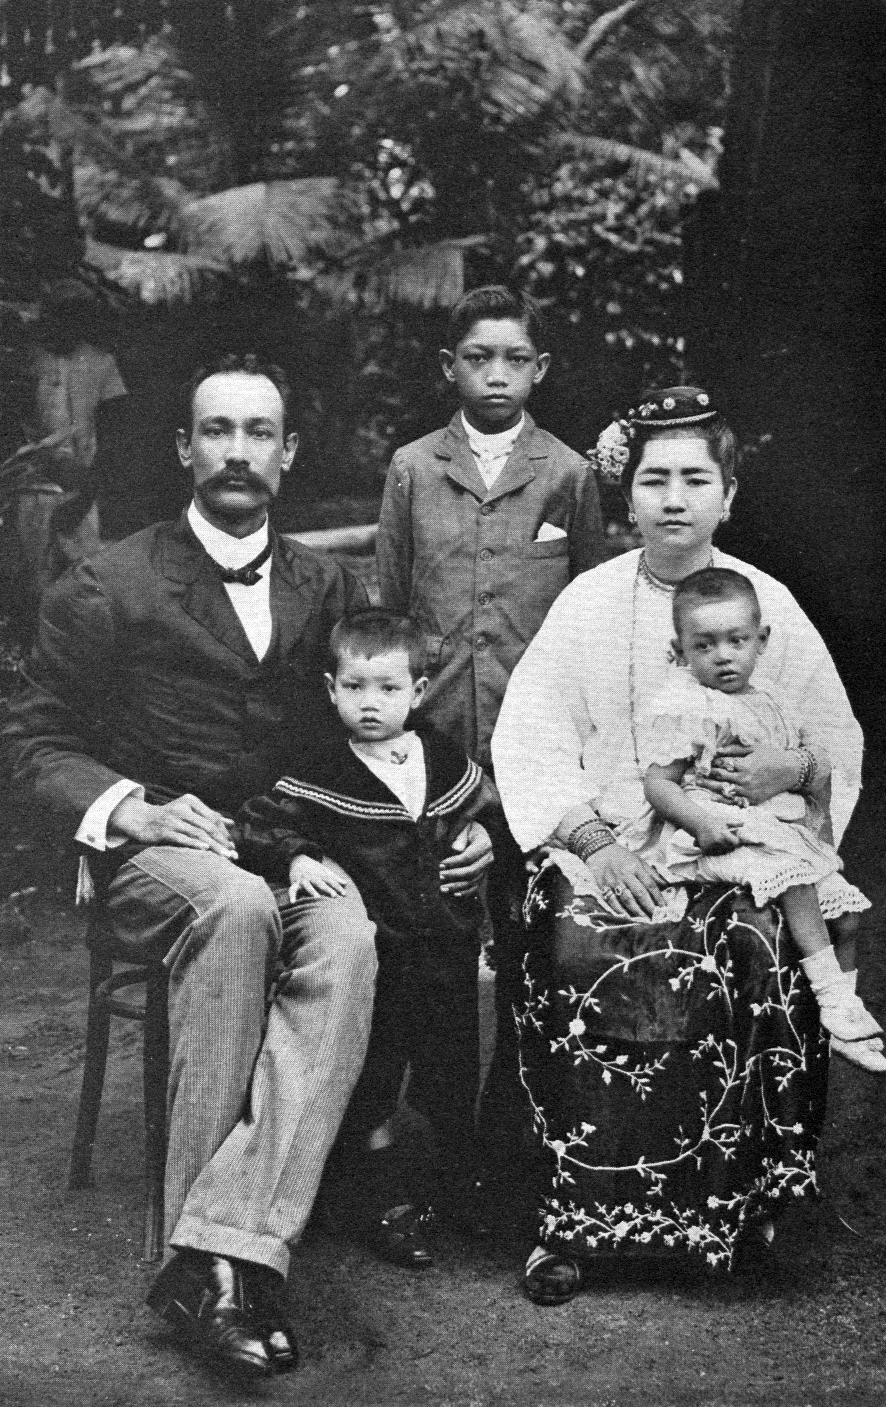 The Anglo-Burmese people, also known as the Anglo-Burmans, are a community of Eurasians of Burmese and European descent, who emerged as a distinct community through mixed relationships (sometimes permanent, sometimes temporary) between the British and other Europeans and Burmese people from 1826 until 1948 when Myanmar gained its independence from the British Empire. Those who could not adjust to the new way of life after independence and the ushering in of military dictatorship are dispersed throughout the world. How many stayed in Myanmar is not accurately known.
The term "Anglo-Burmese" is also used to refer to Eurasians of European and other Burmese ethnic minority groups (e.g. Shan, Karen, Mon, Sino-Burmese) descent. It also, after 1937, included Anglo-Indian residents in Burma. Collectively, in the Burmese language, Eurasians are specifically known as bo kabya; the term kabya refers to persons of mixed ancestry or dual ethnicity.